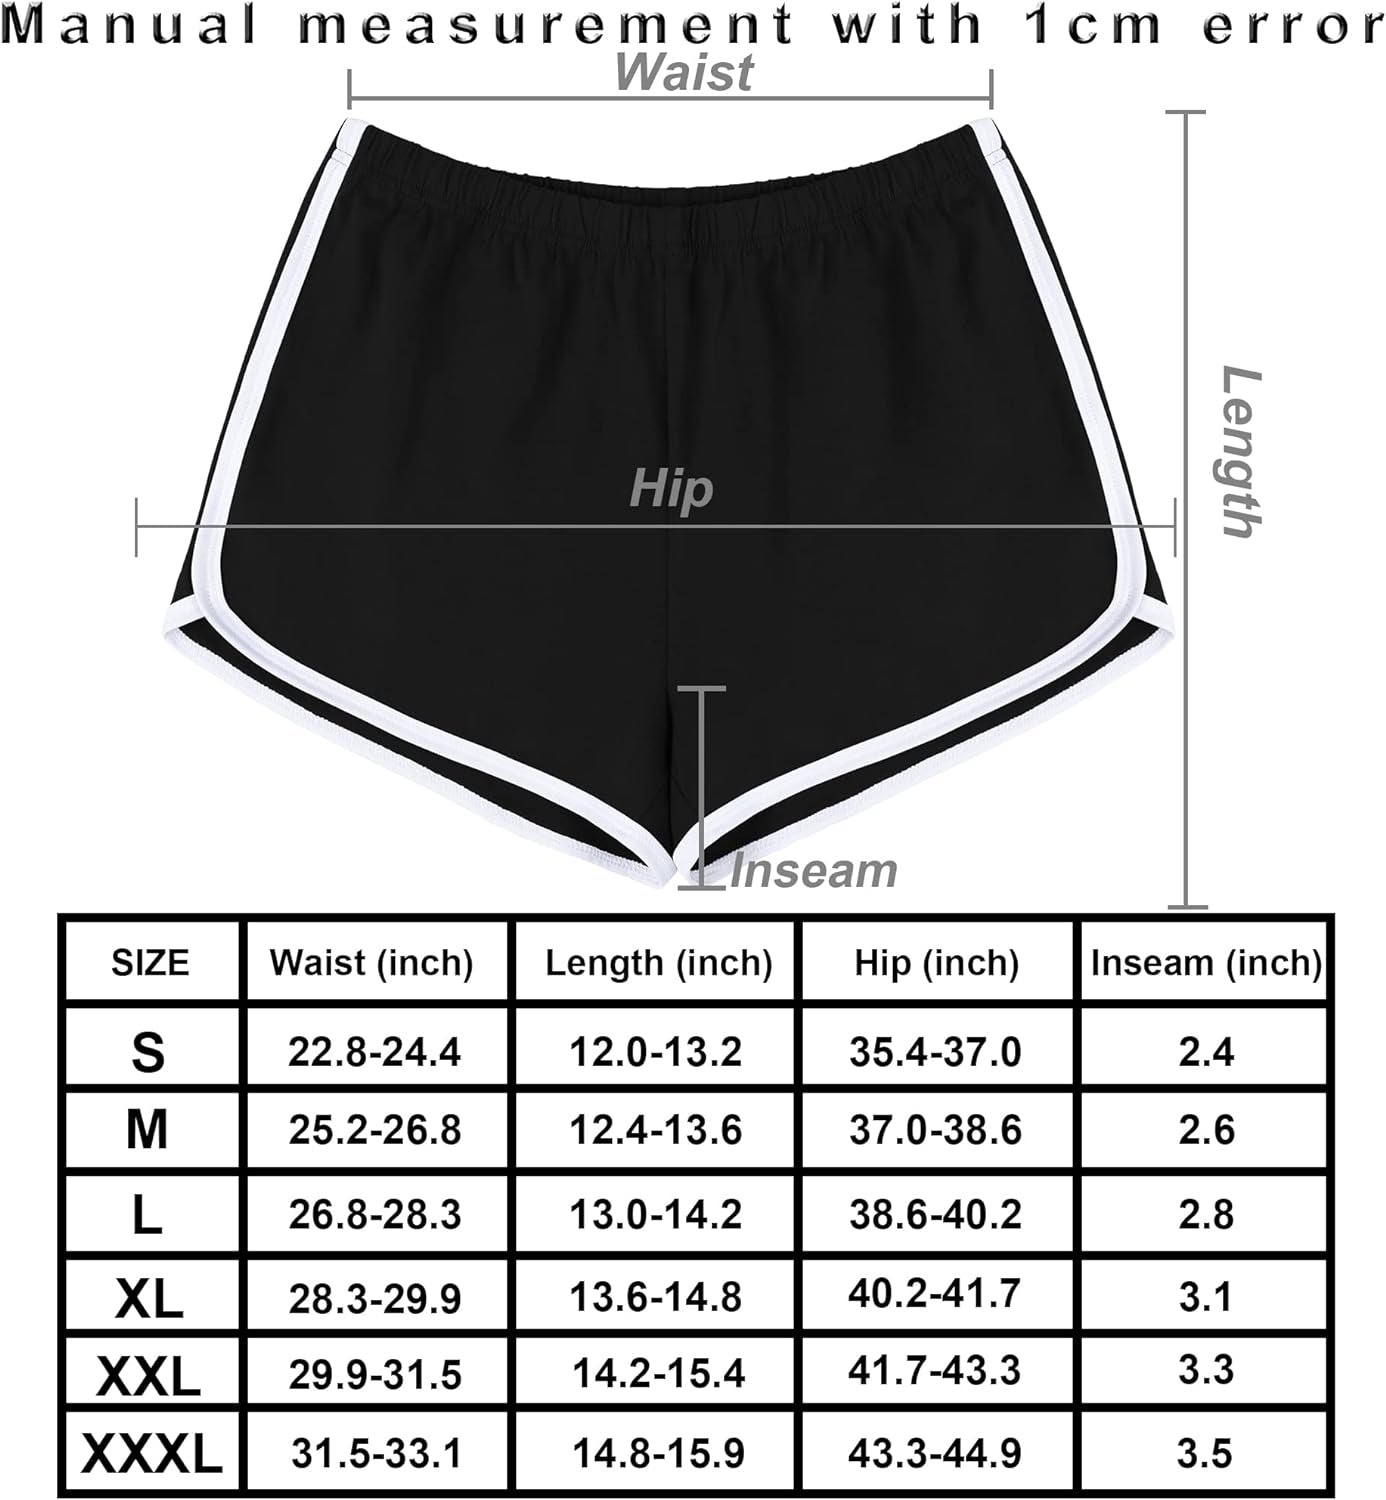 5 Packs Soft Comfy Booty Shorts for Women Cotton Yoga Sports Workout Short Athletic Cycling Hiking Sports Shorts